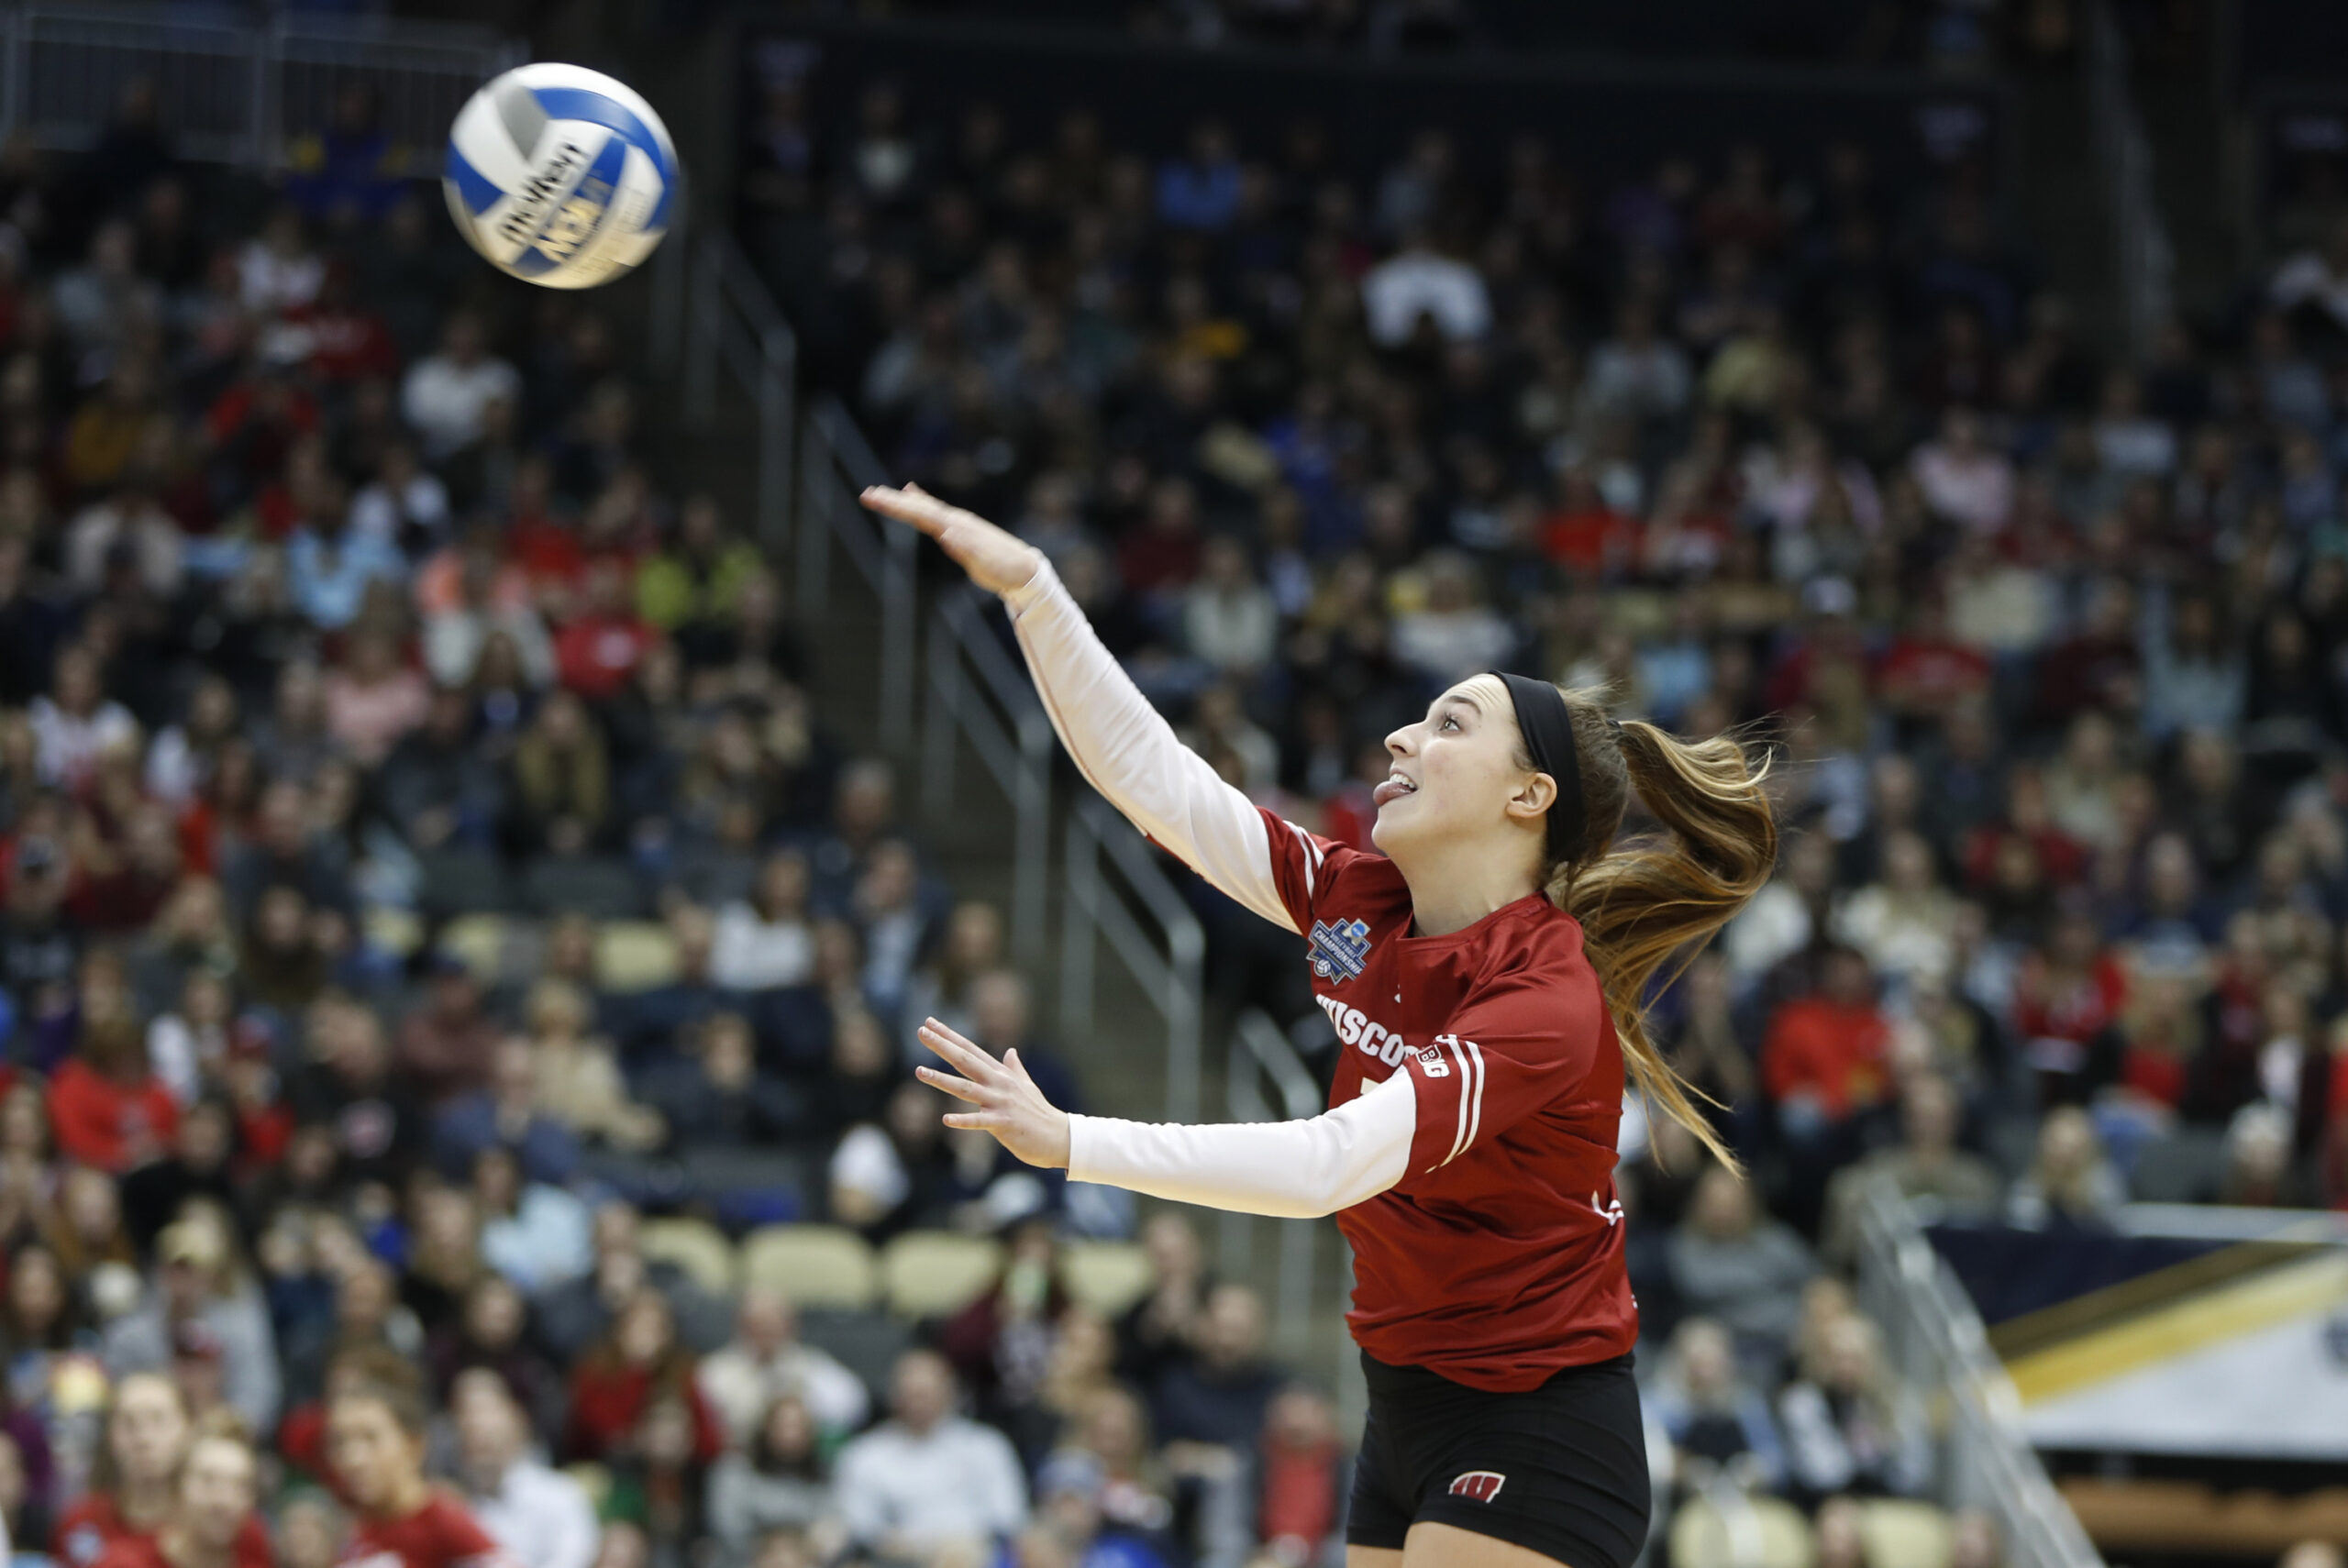 Wisconsin's Lauren Barnes serves to Stanford during the NCAA Division I women's volleyball championship match, Saturday, Dec. 21, 2019, in Pittsburgh.